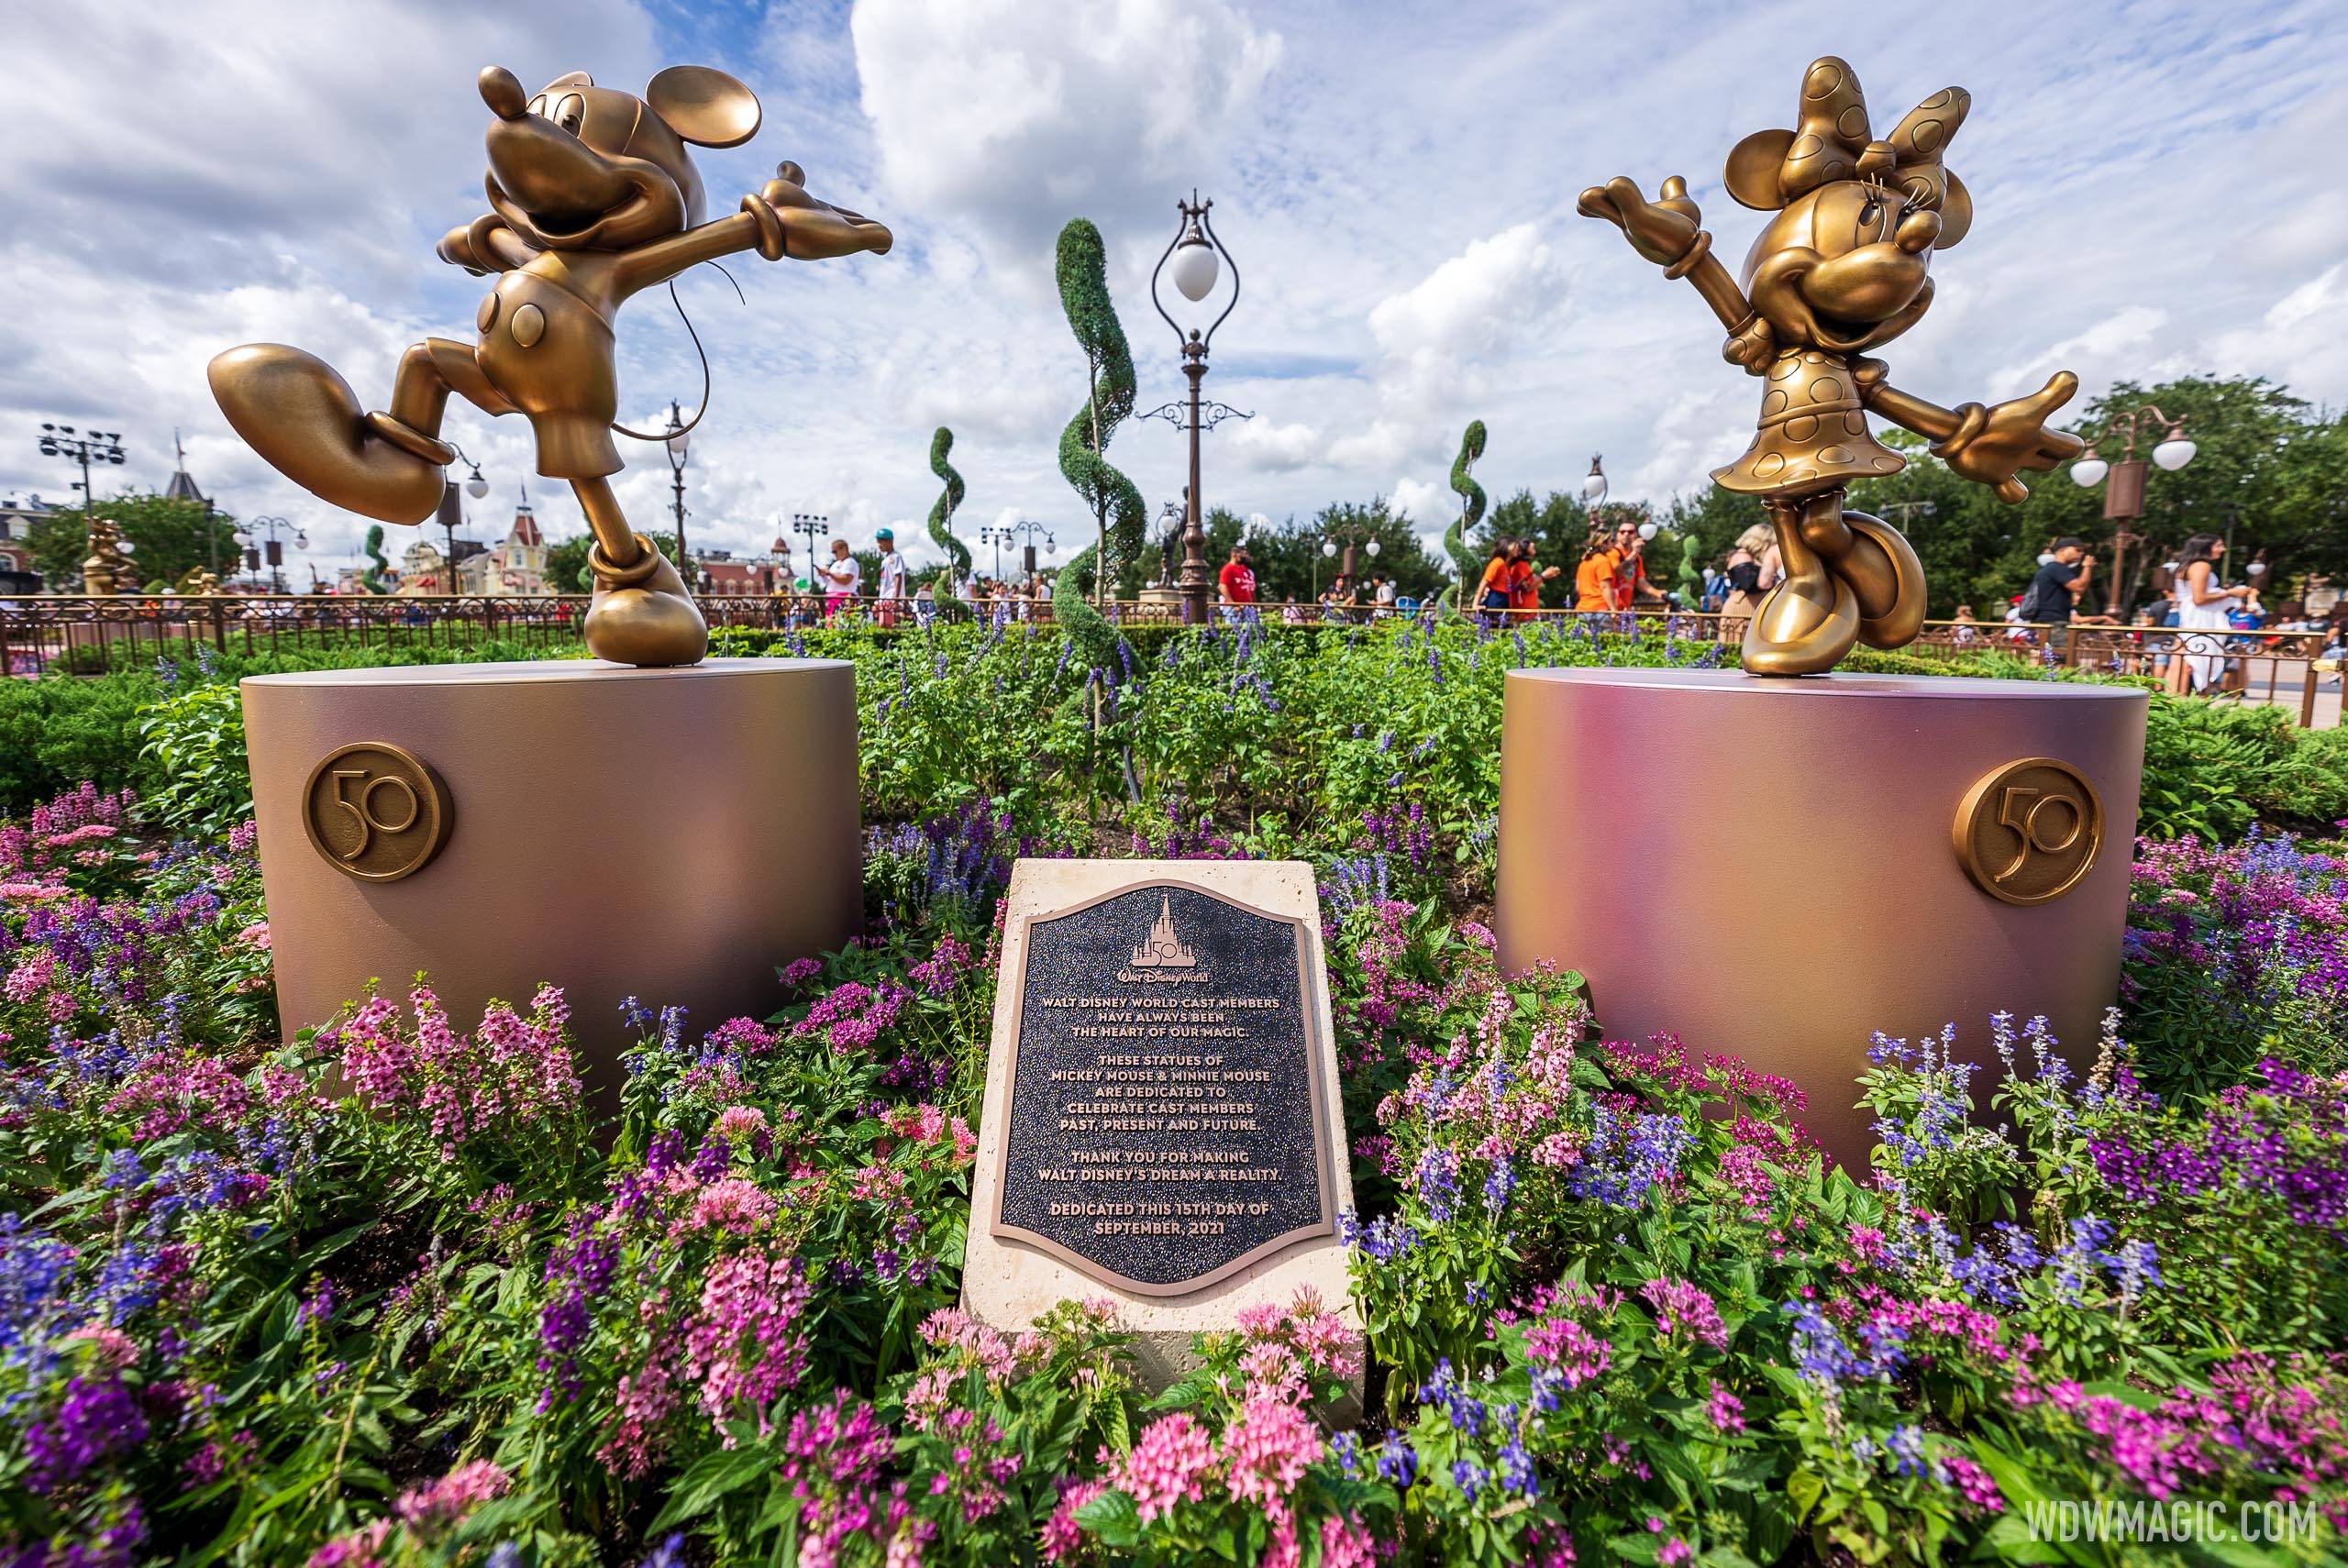 Fab 50 Mickey Mouse and Minnie Mouse statues dedicated to Walt Disney World Cast Members 